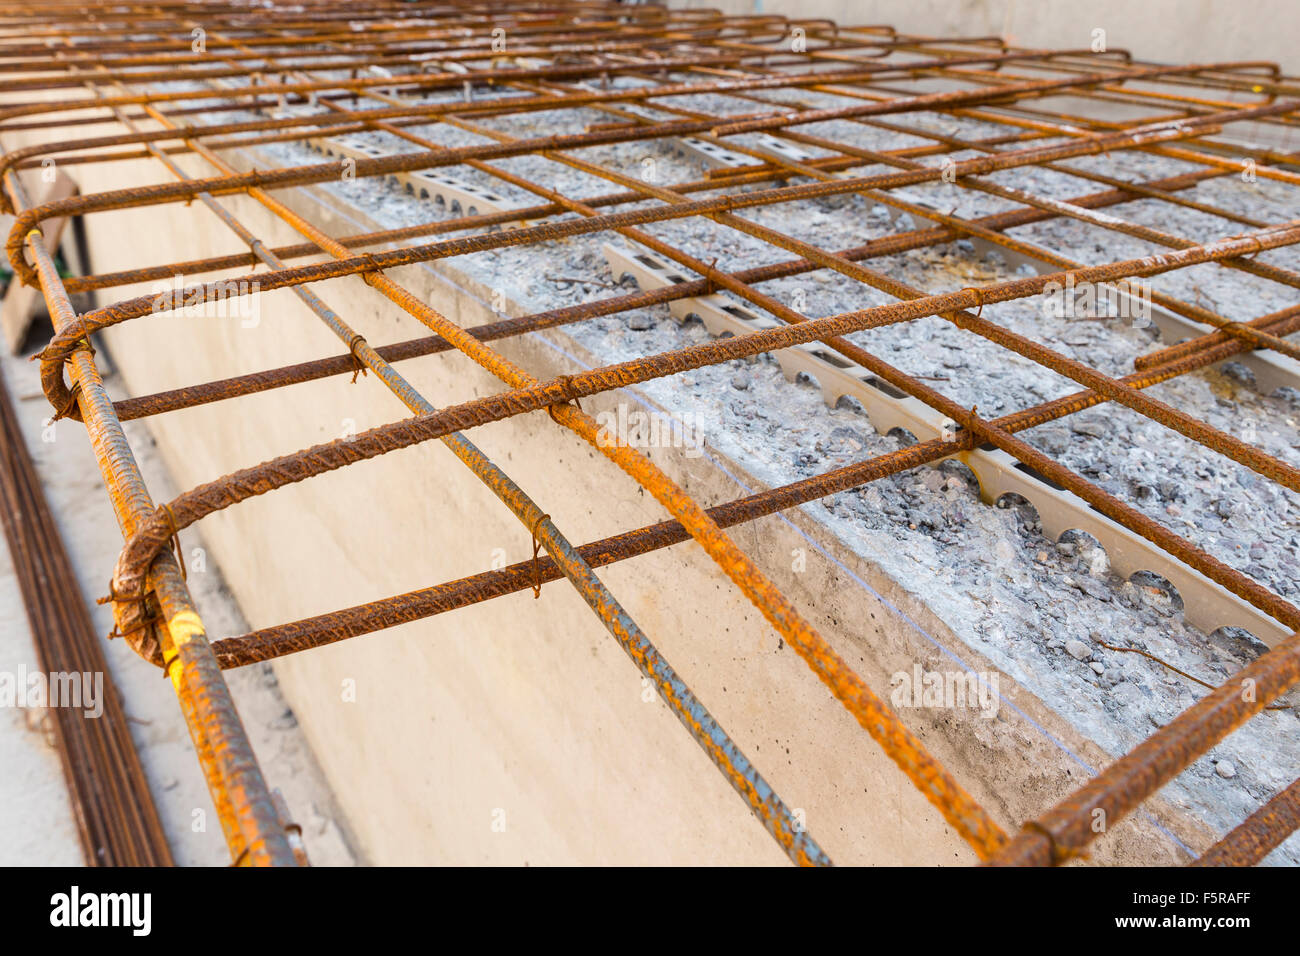 Steel Rebar, ready for concrete to be poured. Stock Photo